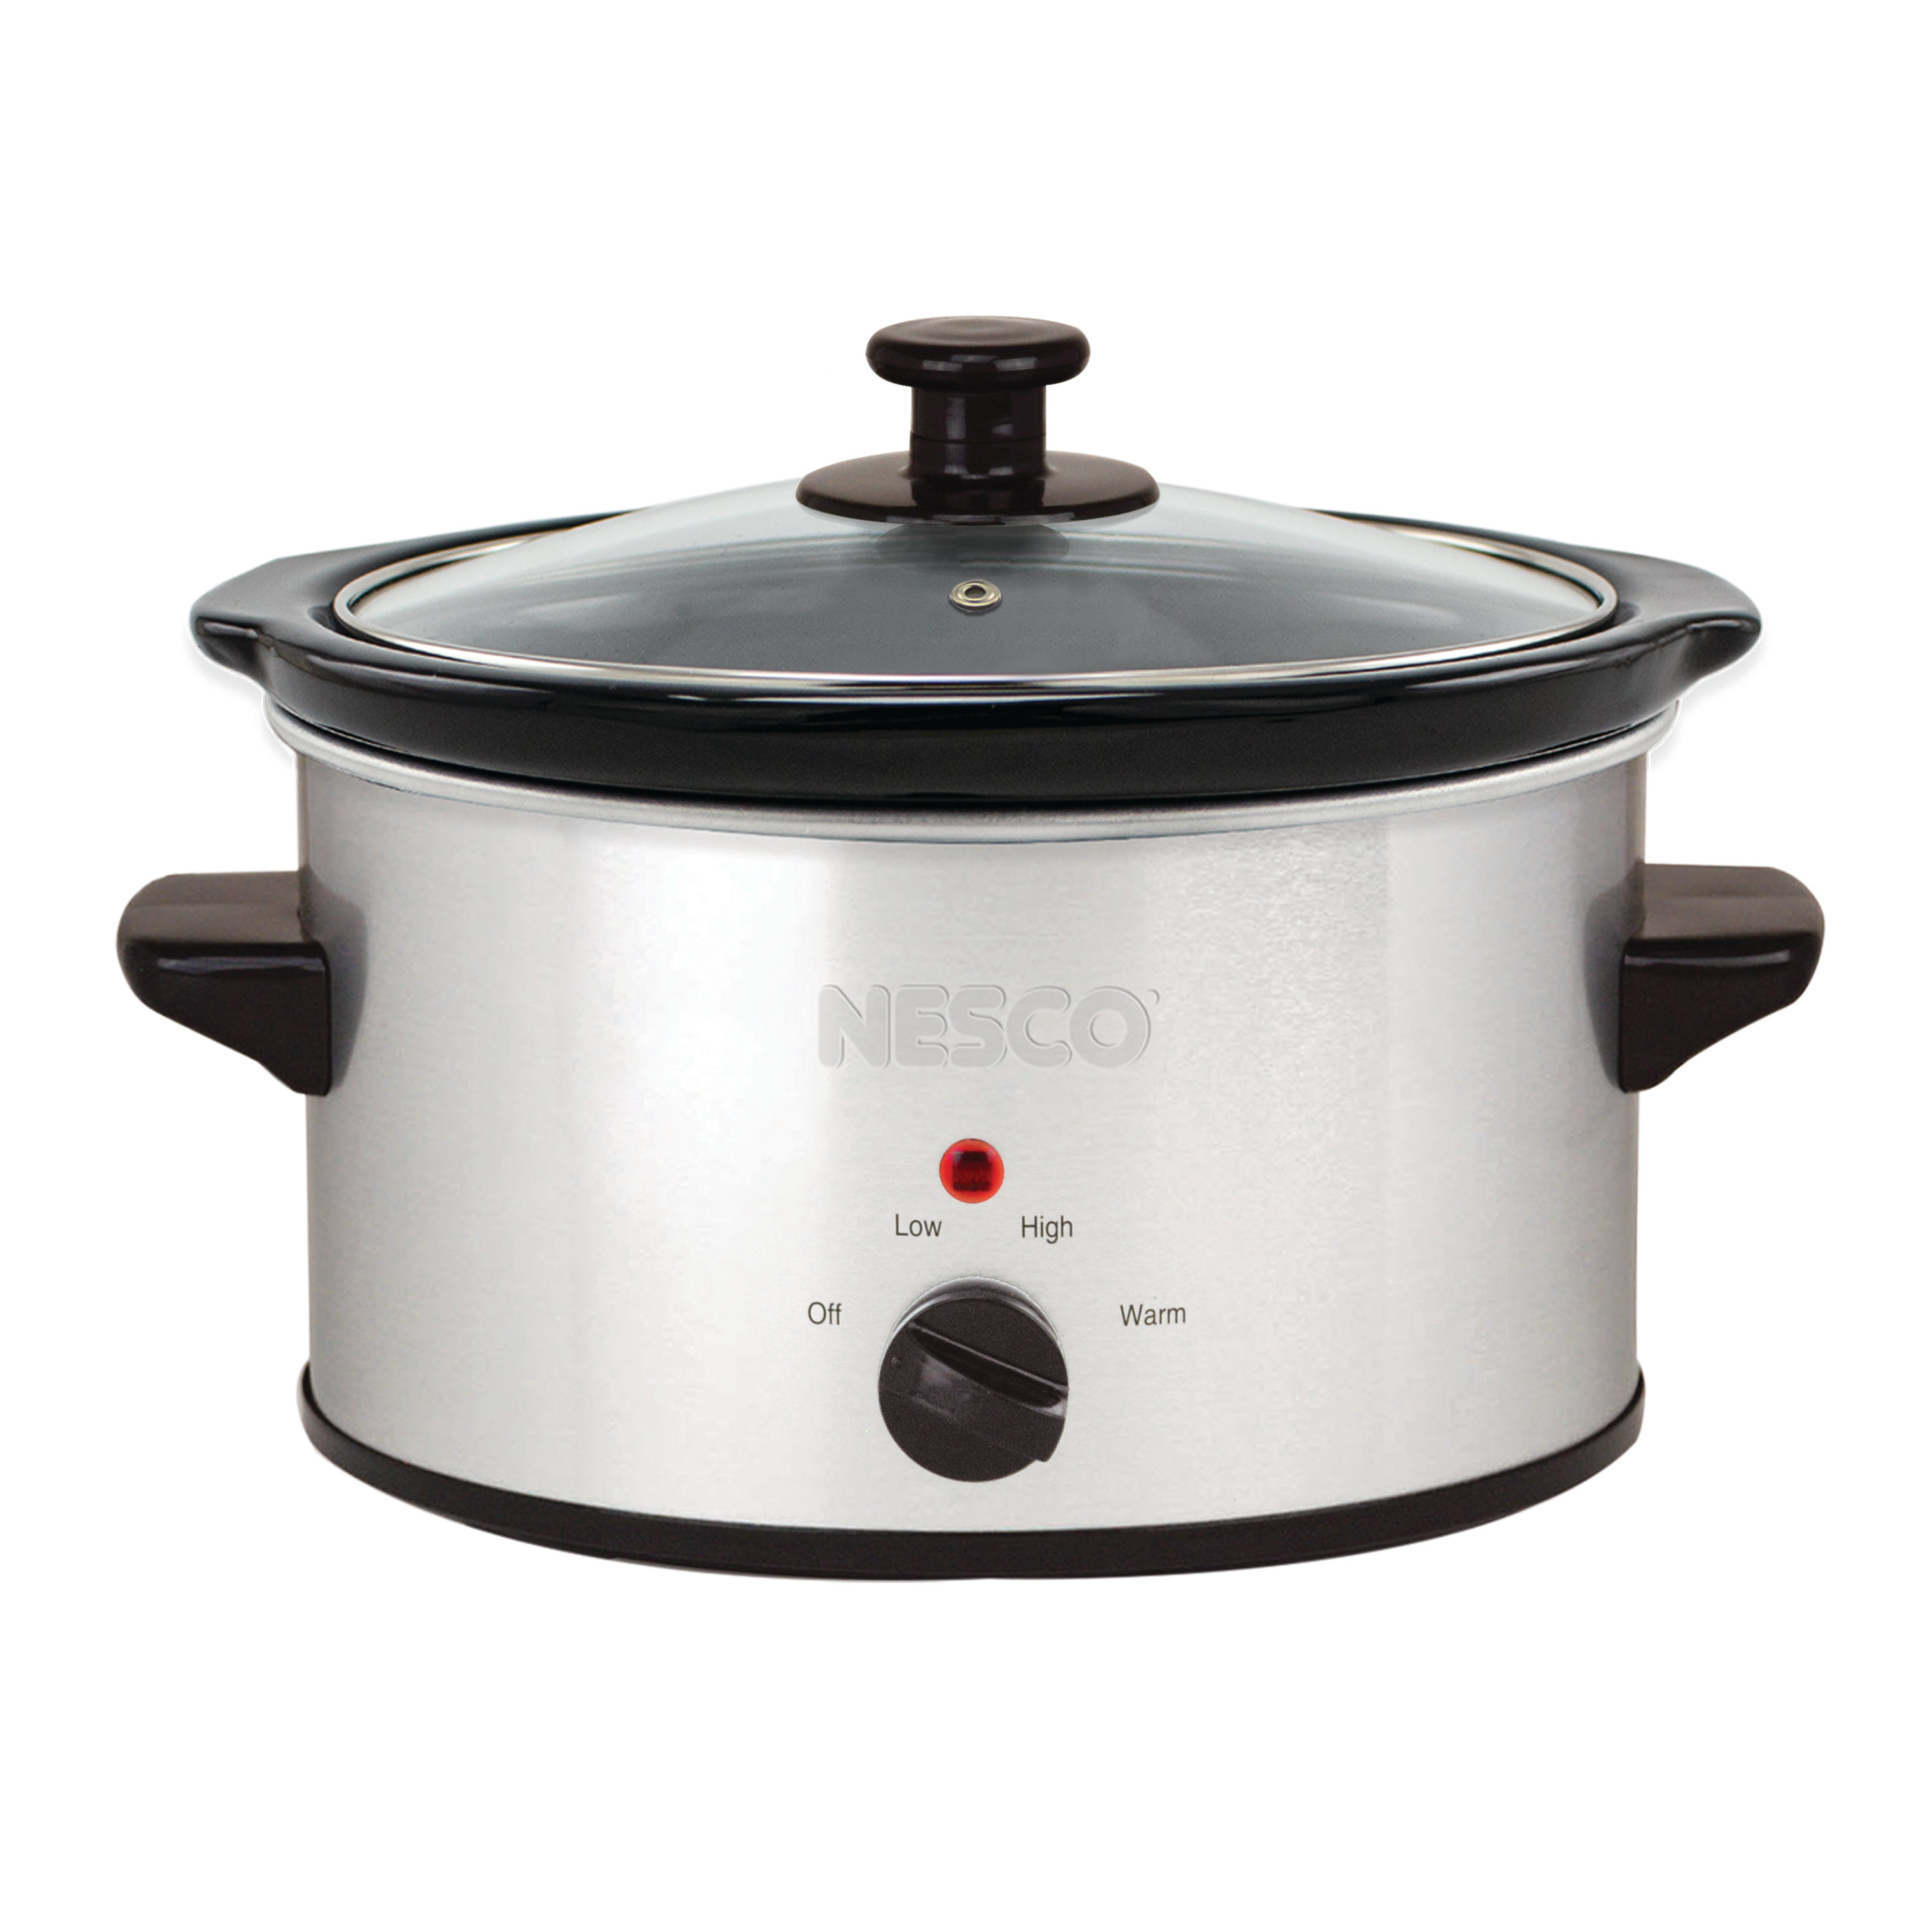 8 Best 3-Quart Slow Cookers 2019  Get the Right Model for You 